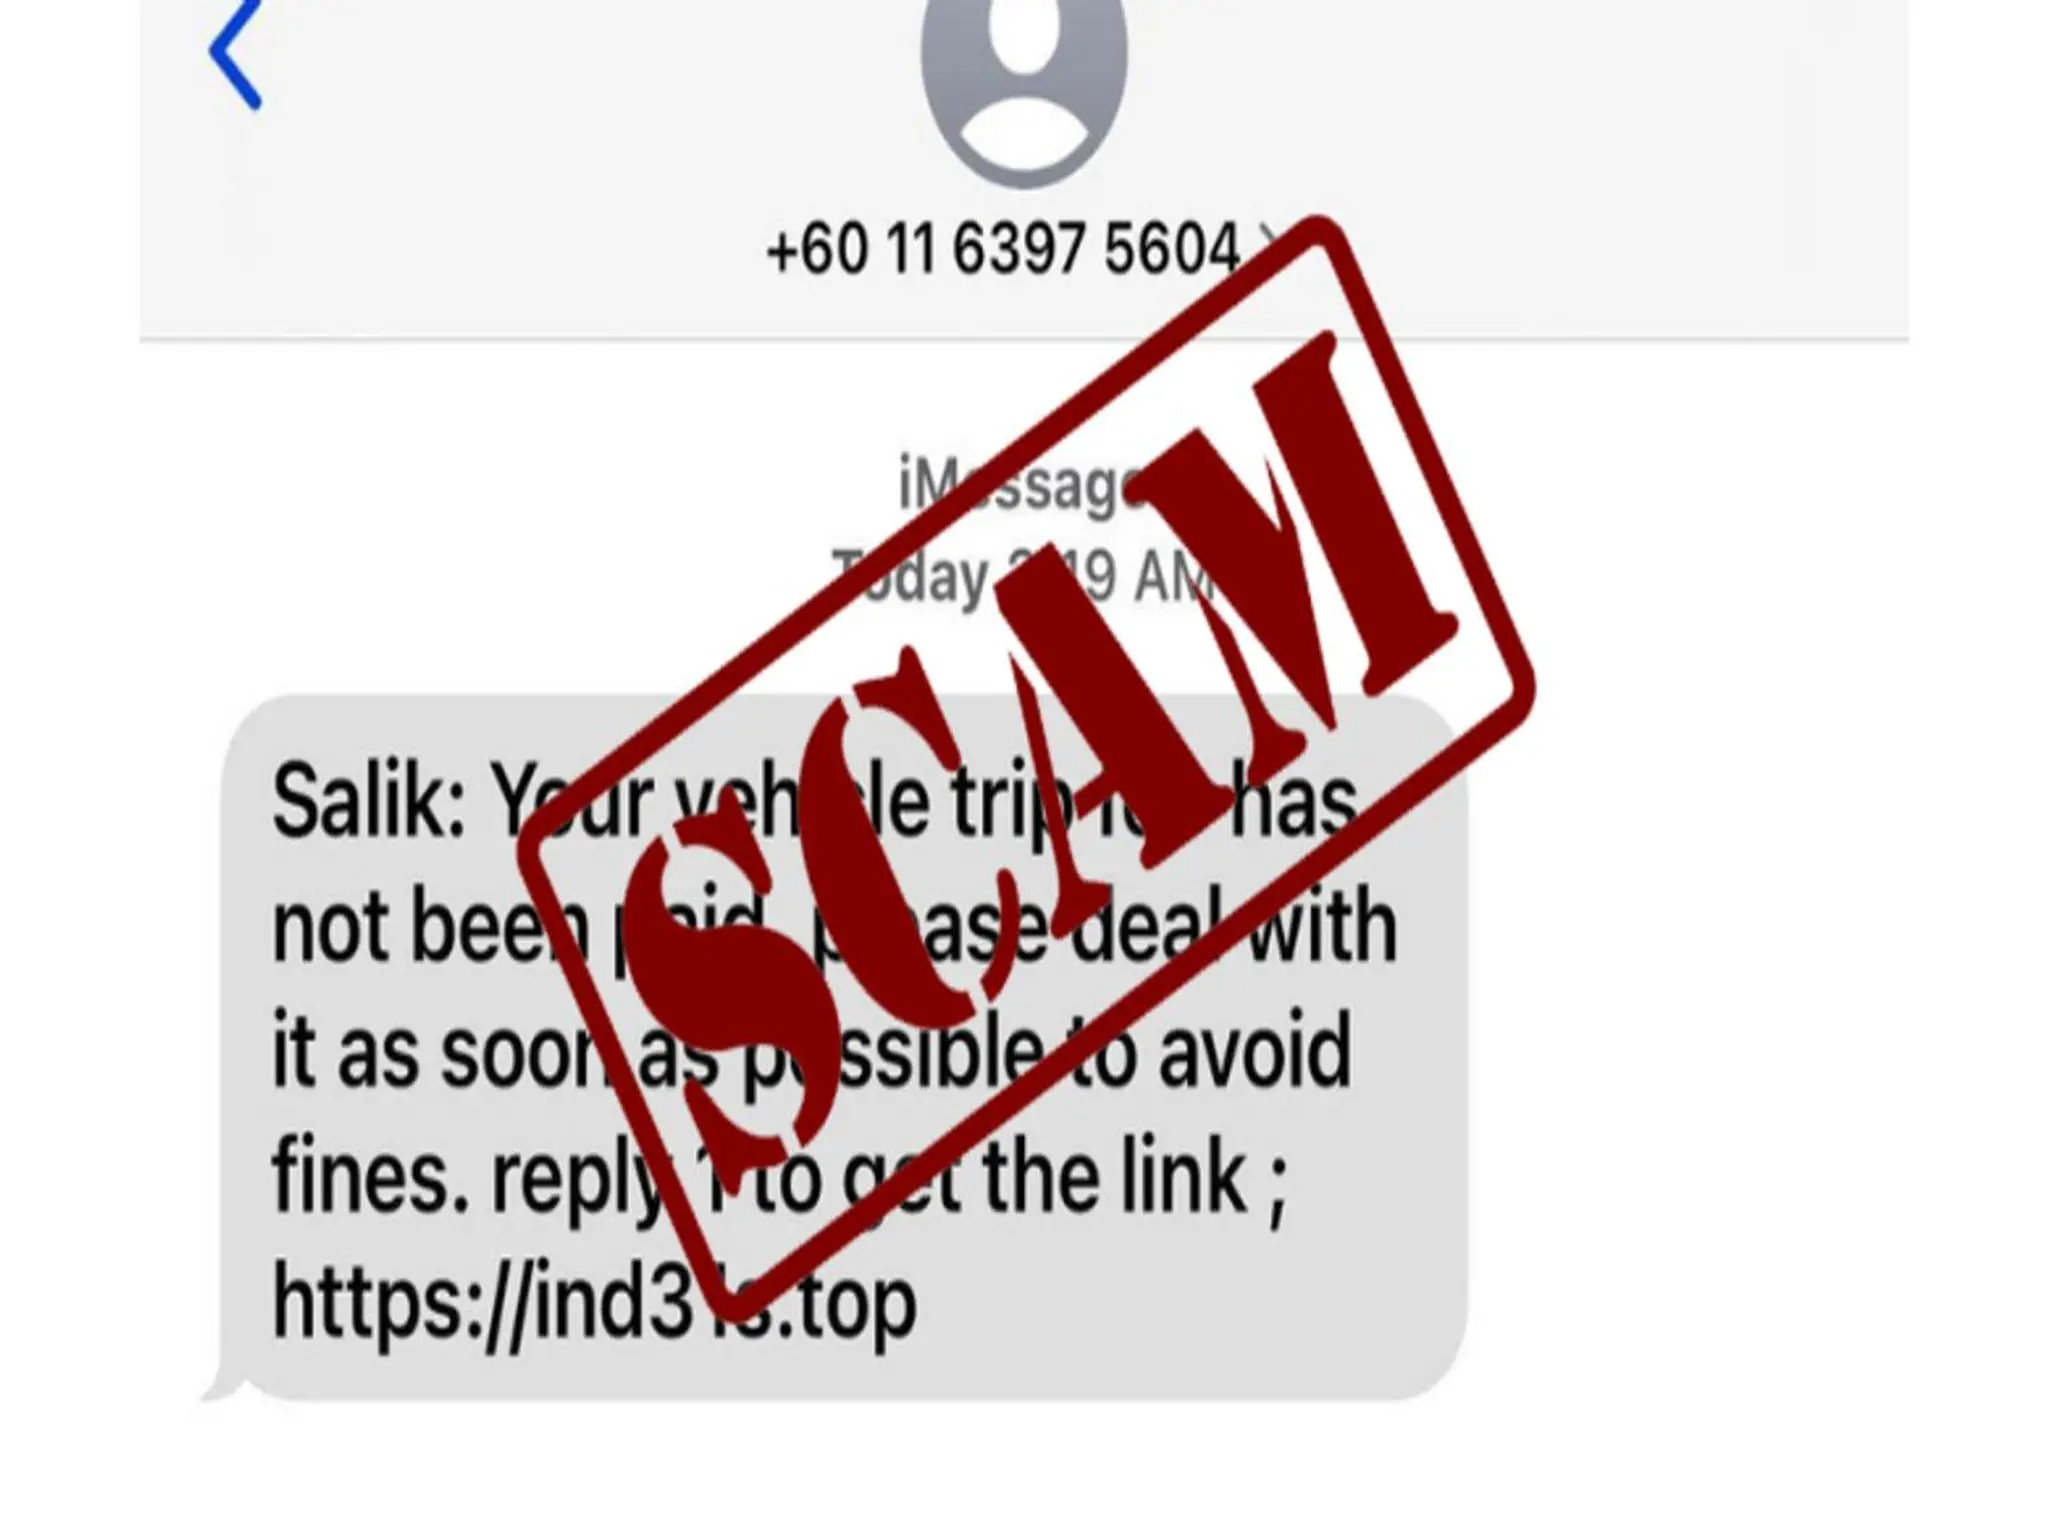 The UAE authorities warn all expats of the fake Salik message